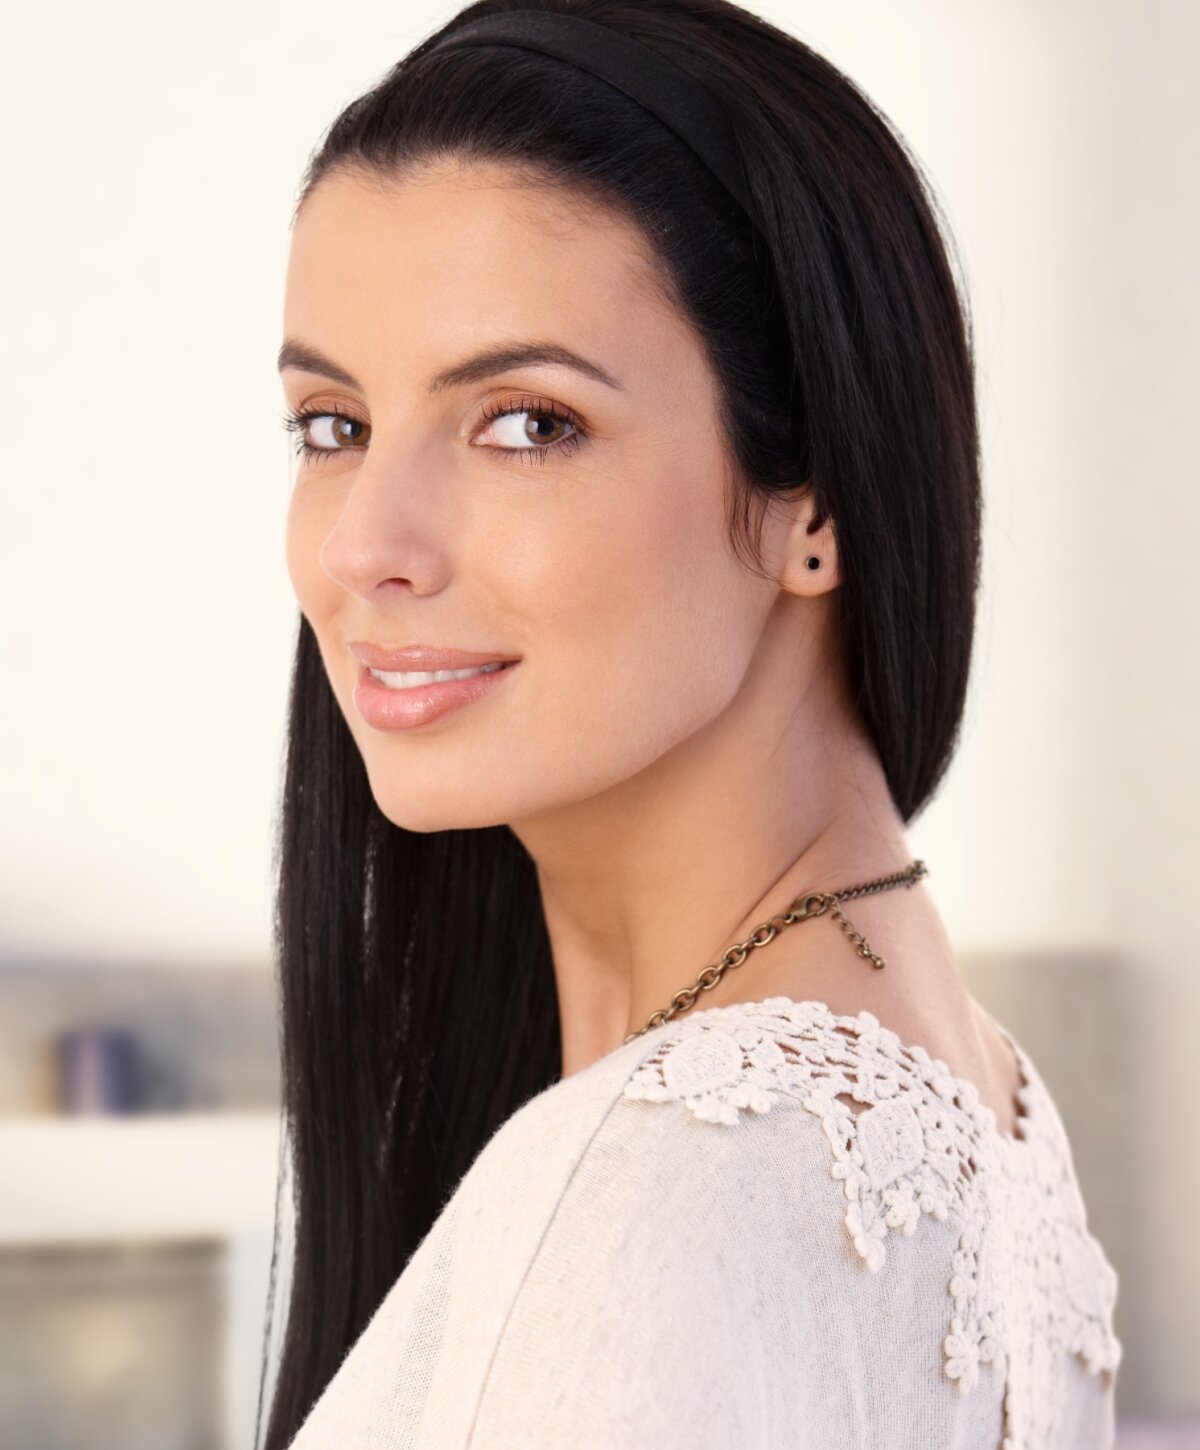 Beverly Hills injectables and fillers model with black hair